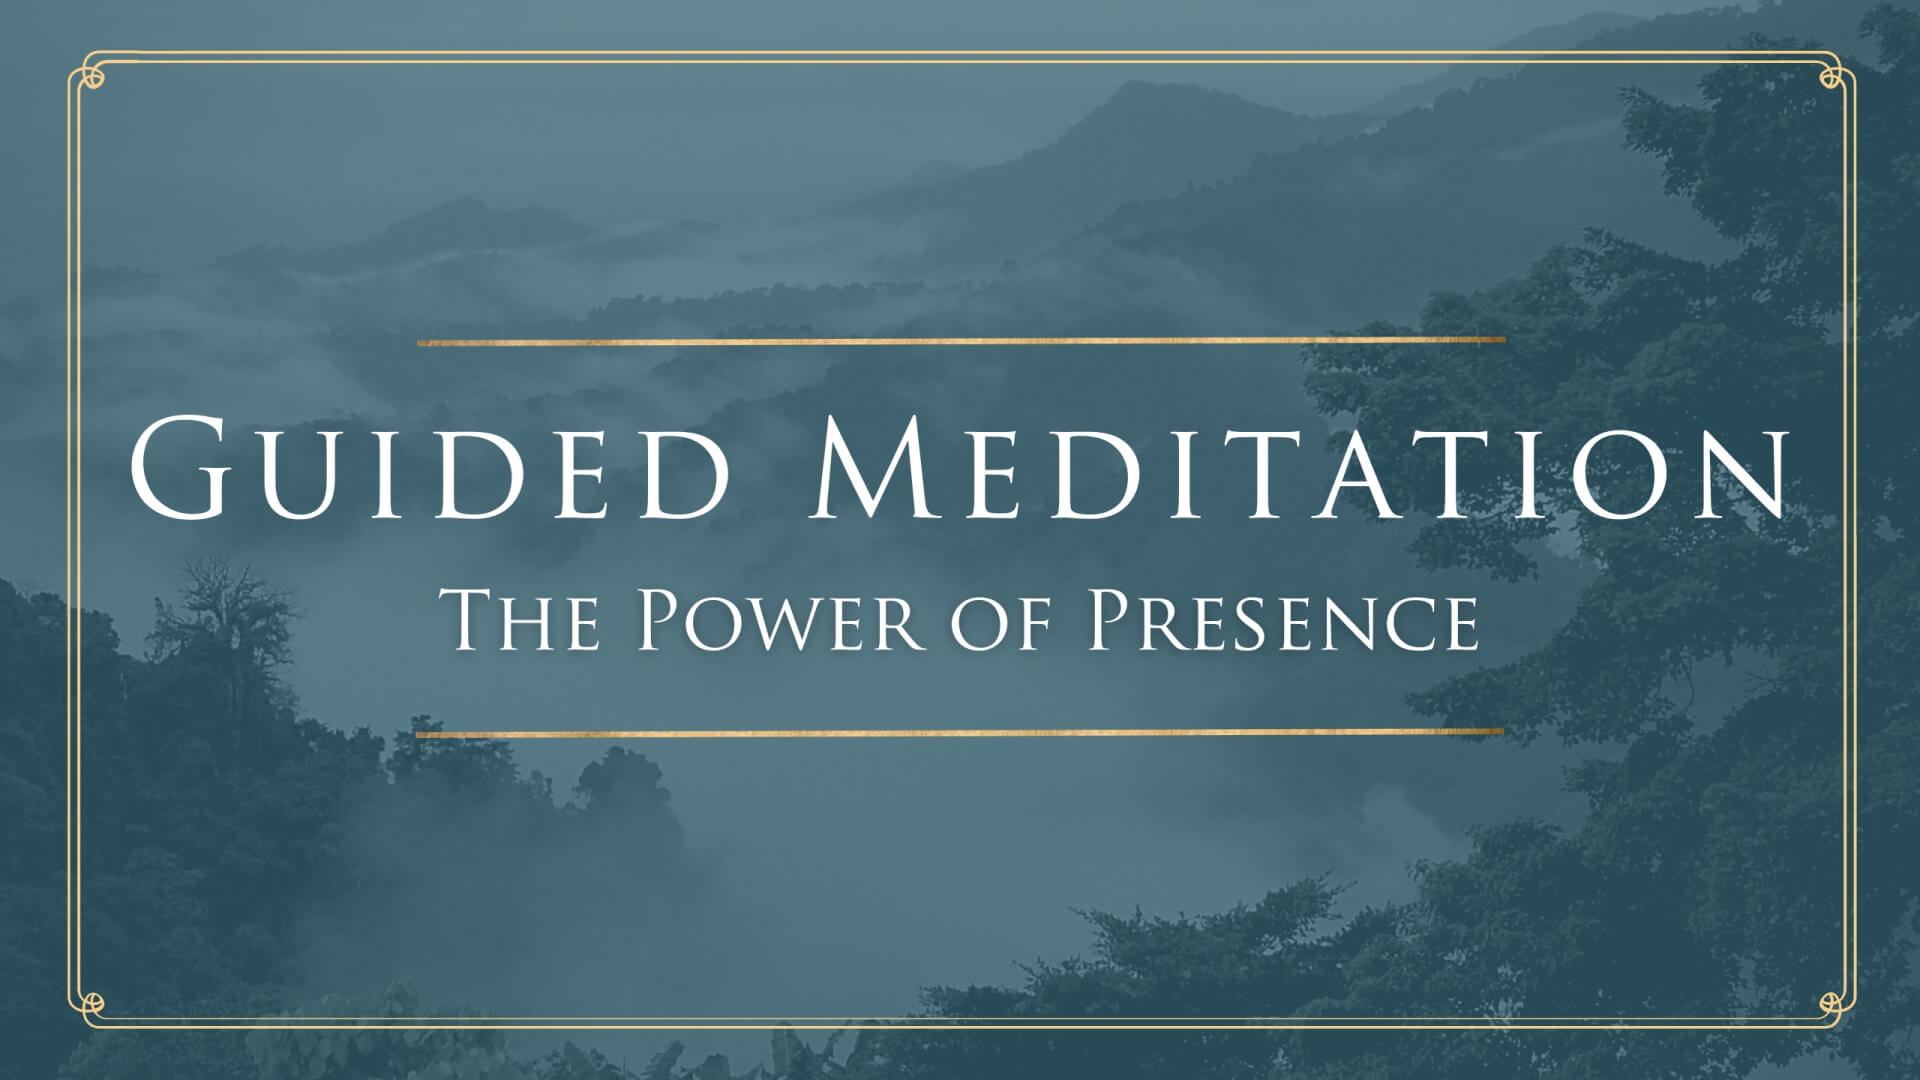 Guided Meditation: The Power of Presence